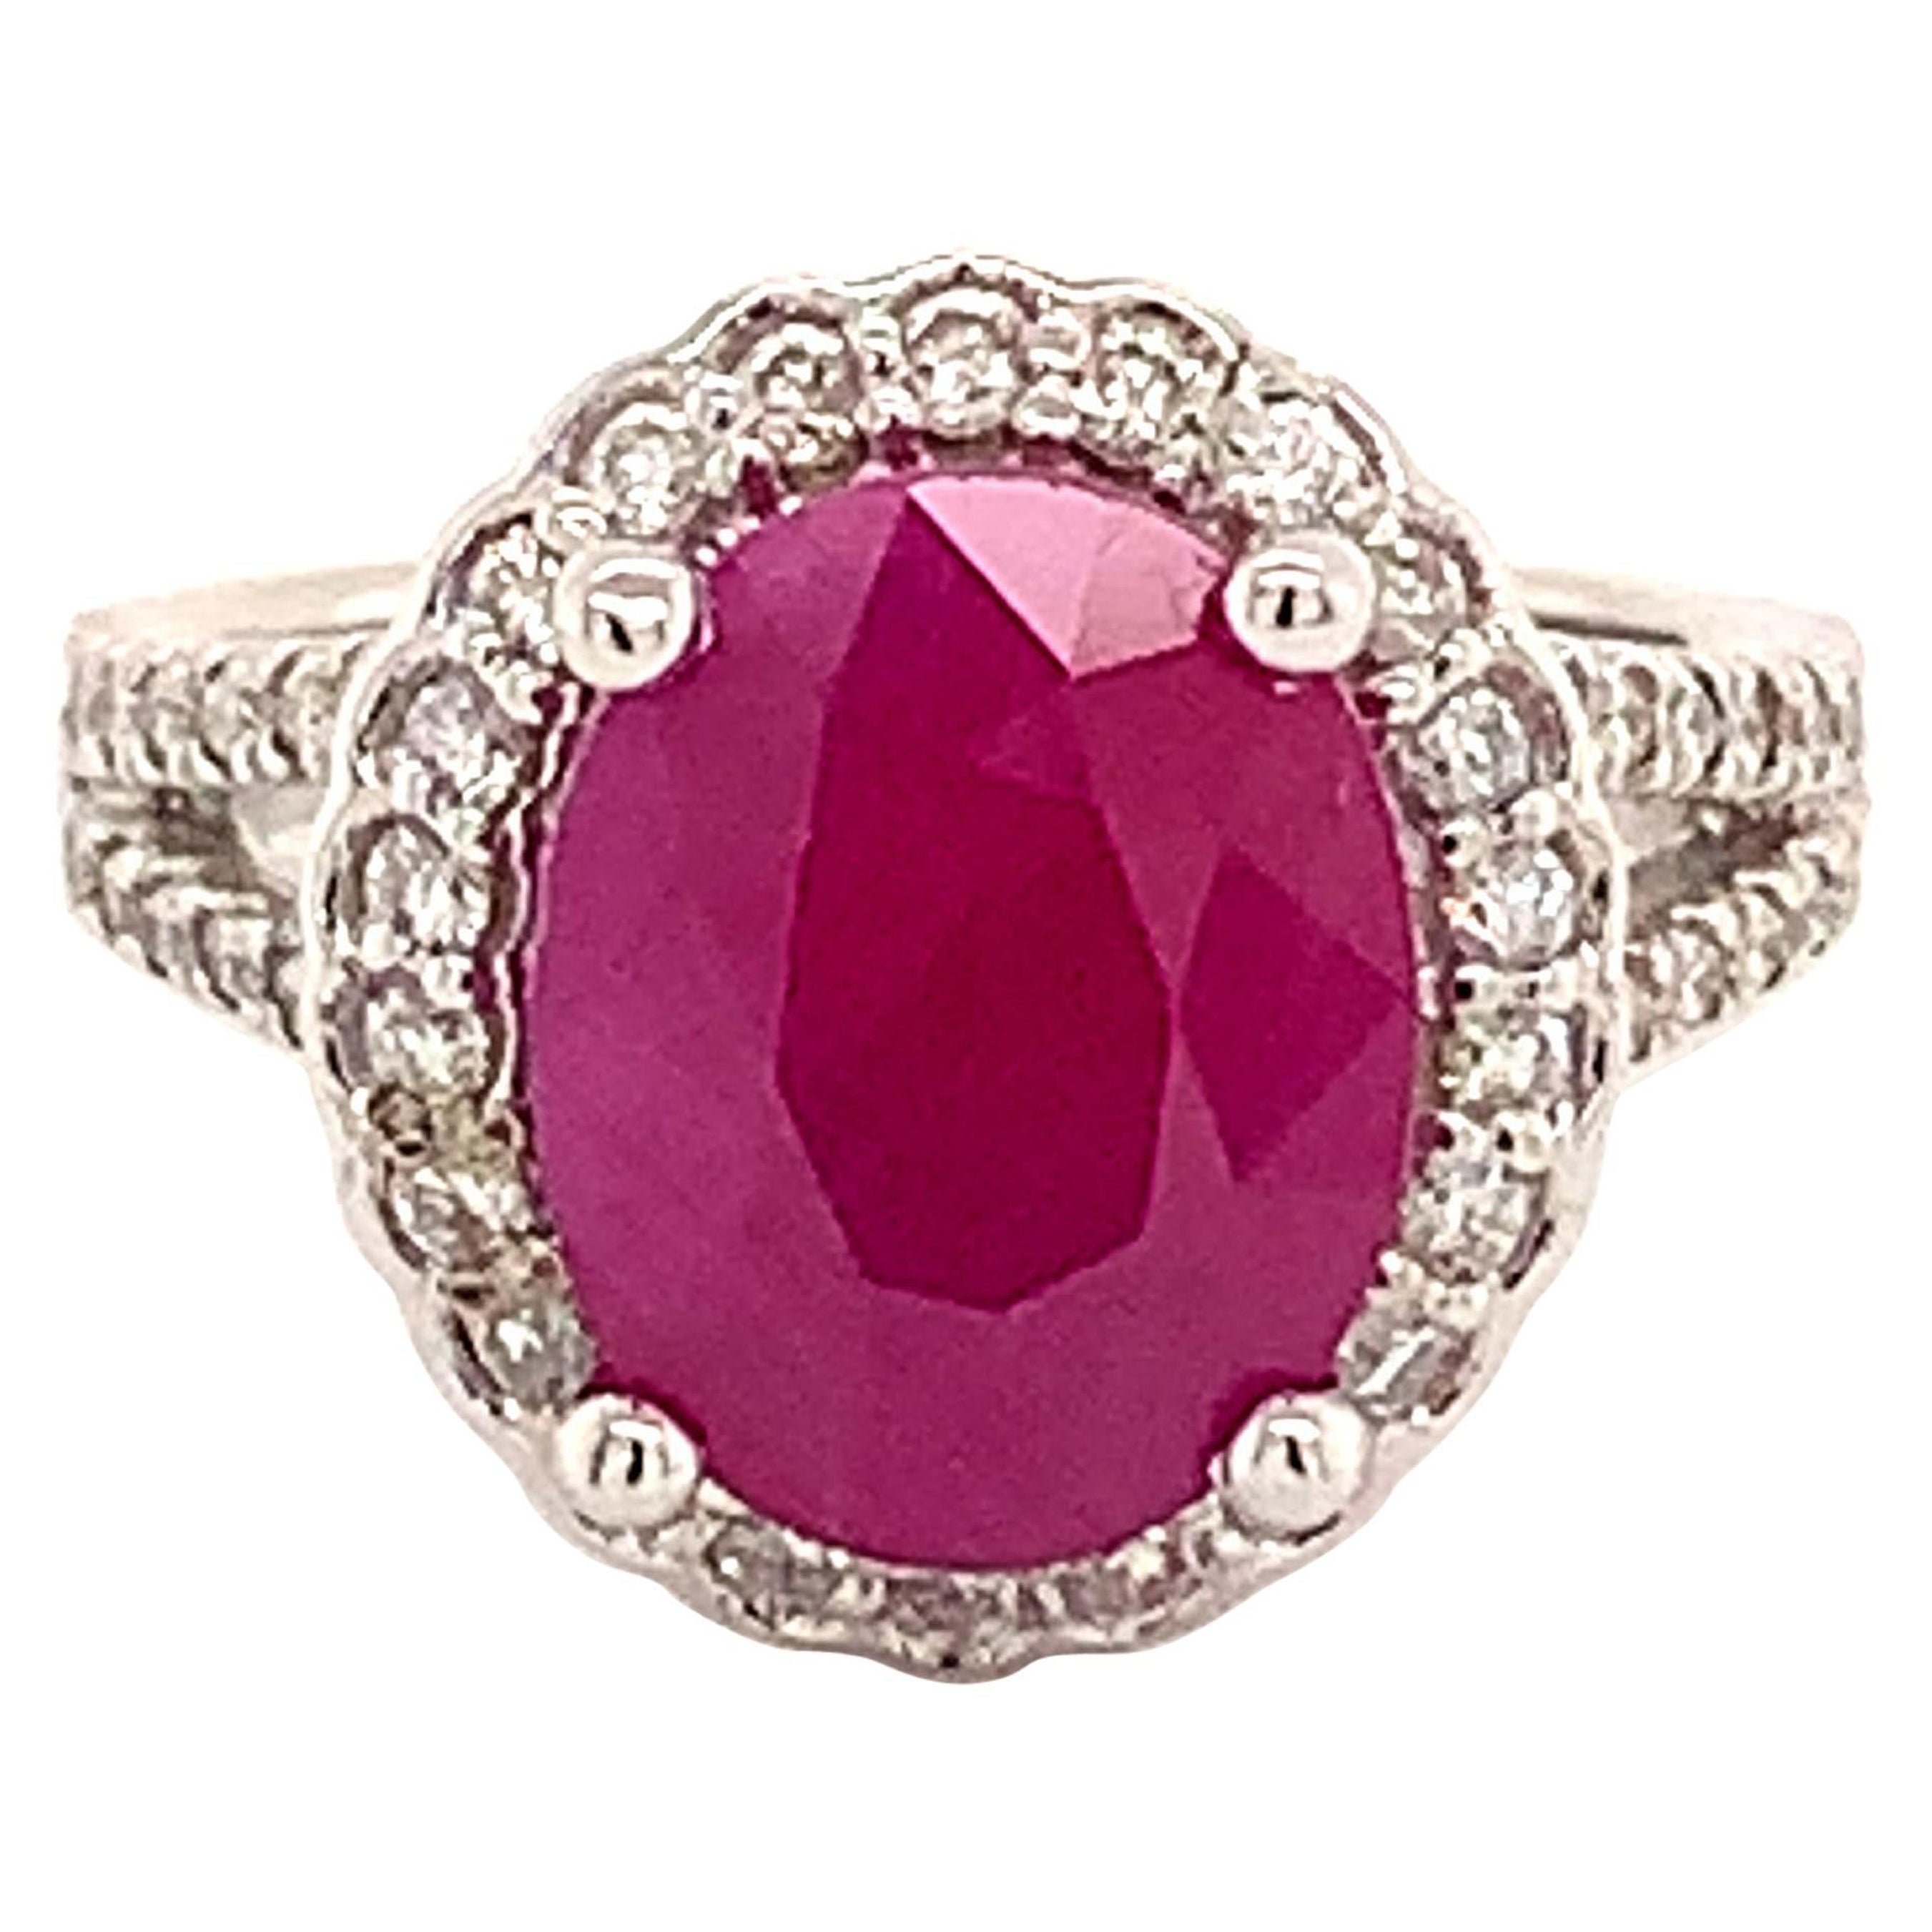 Natural Ruby Diamond Ring 14k Gold 6.5 TCW GIA Certified For Sale